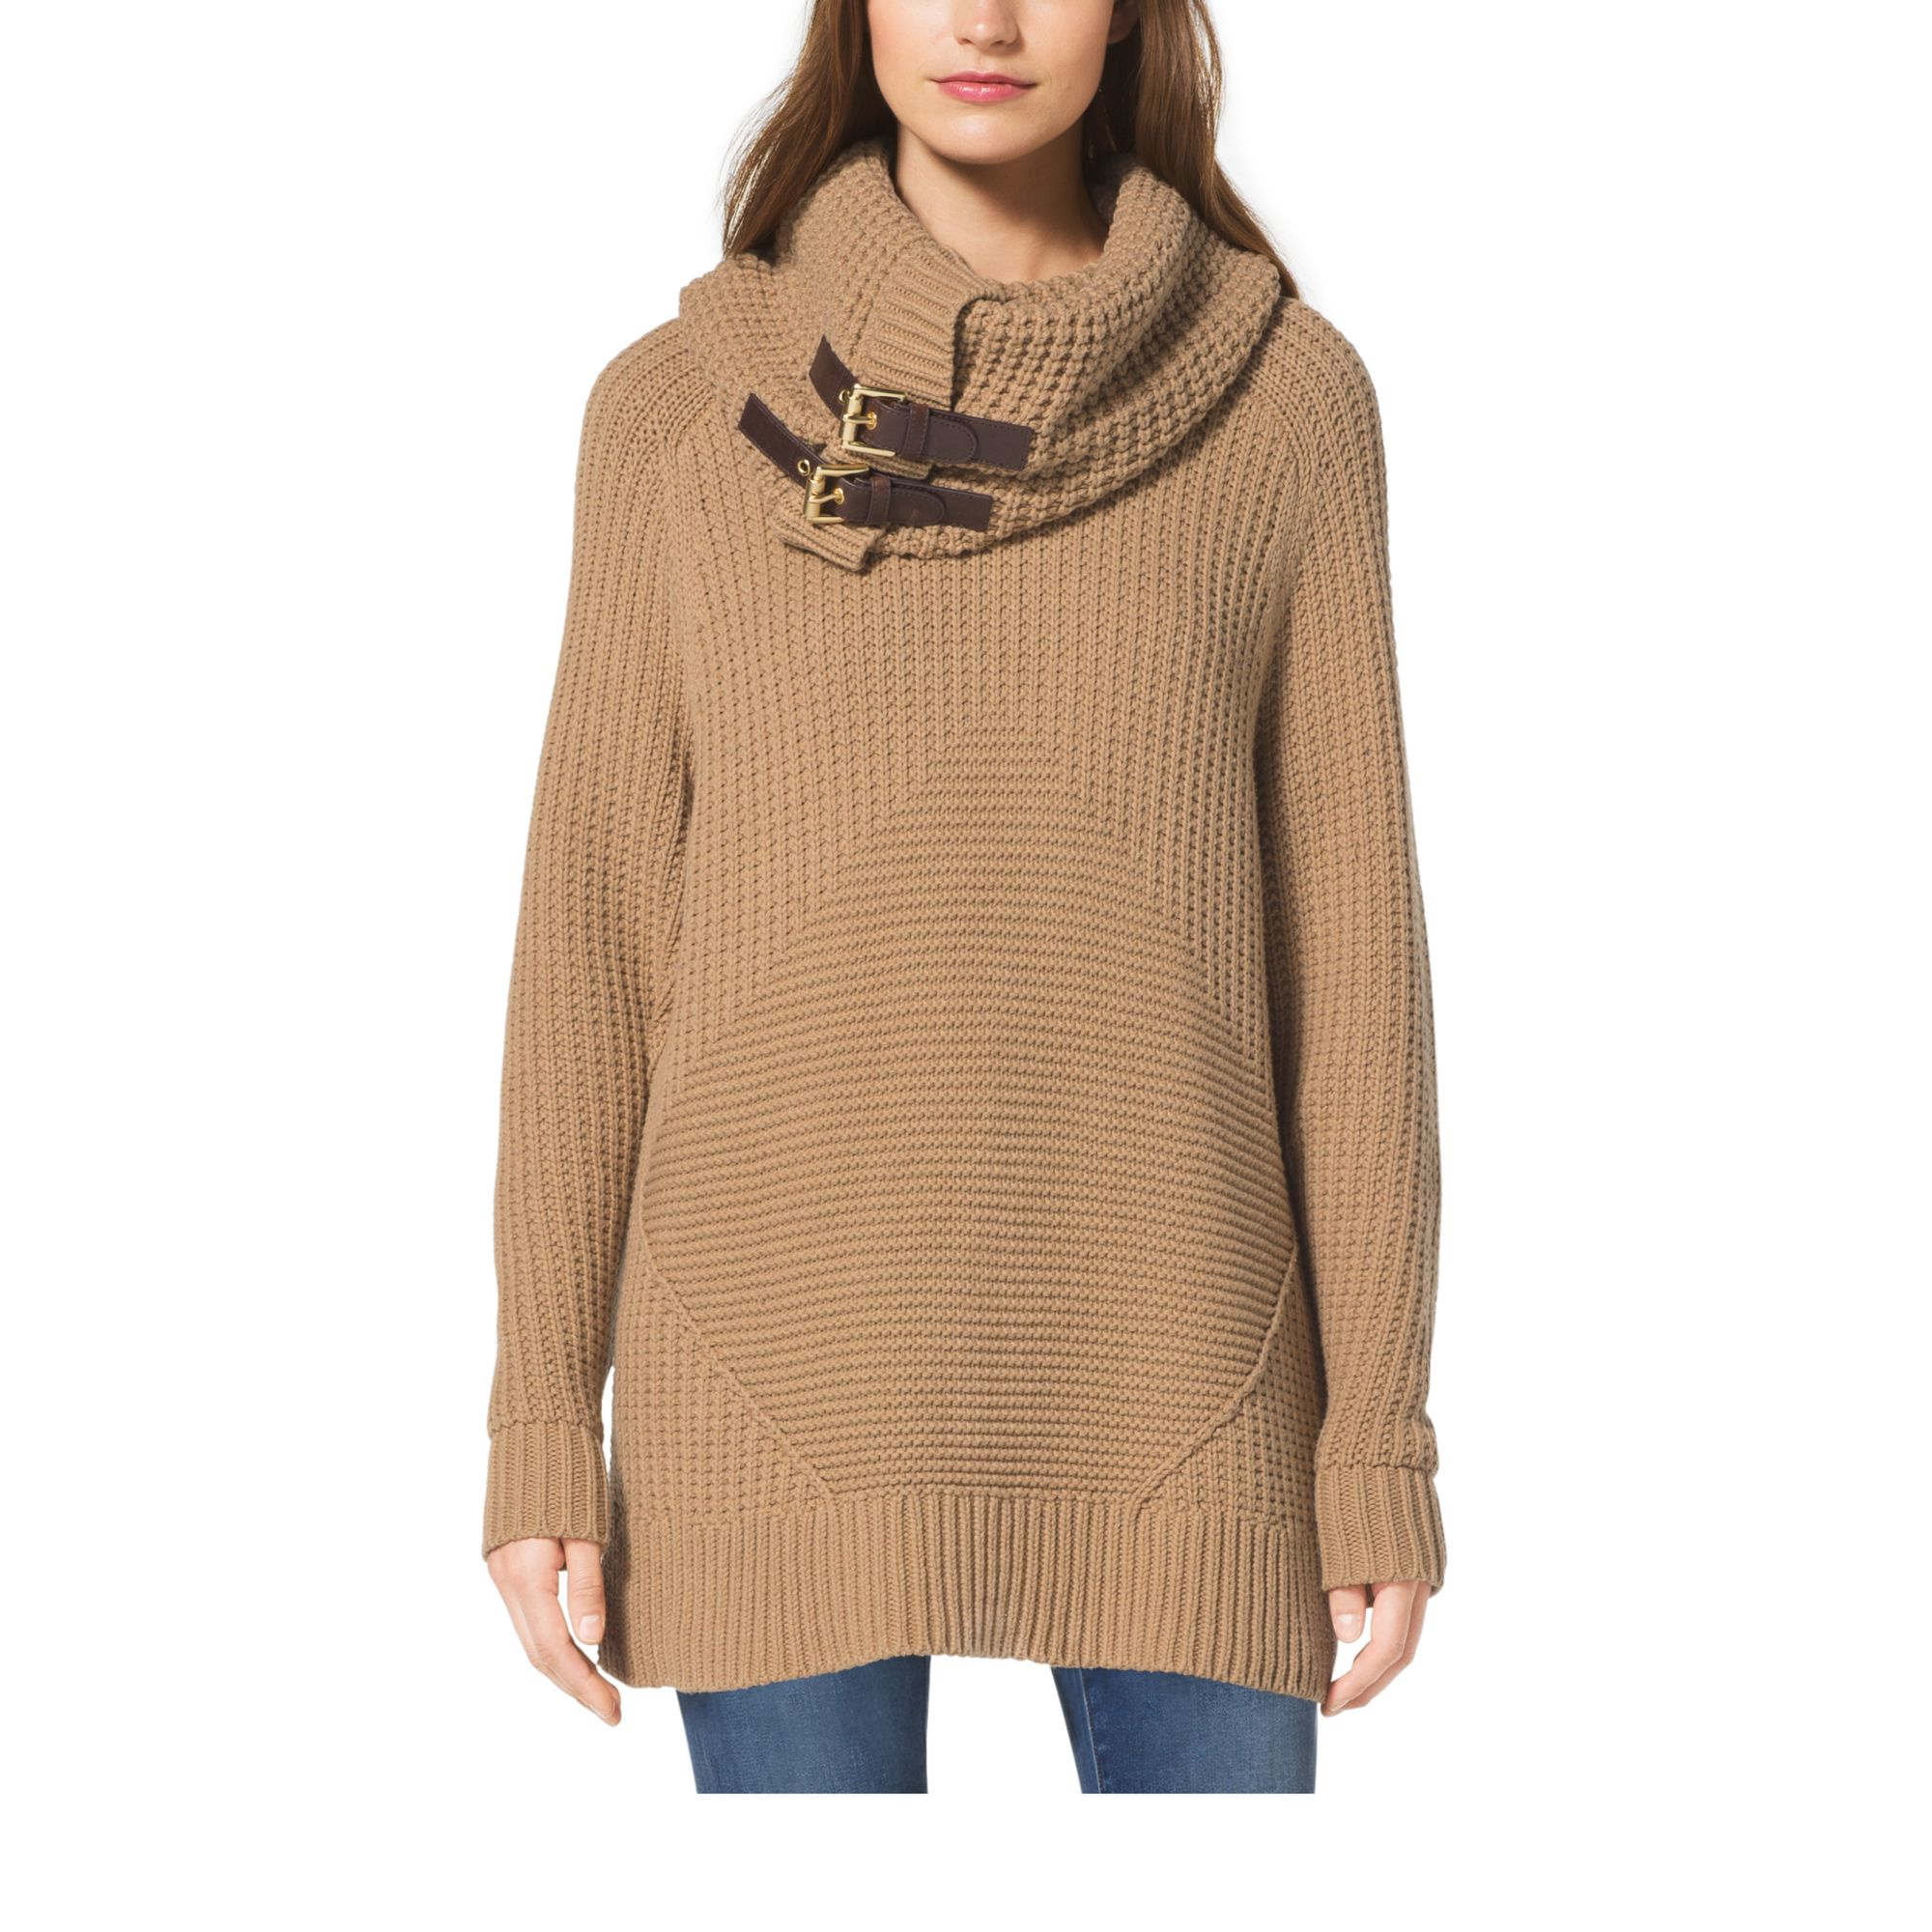 Michael kors Removable Cowl-neck Sweater in Natural | Lyst